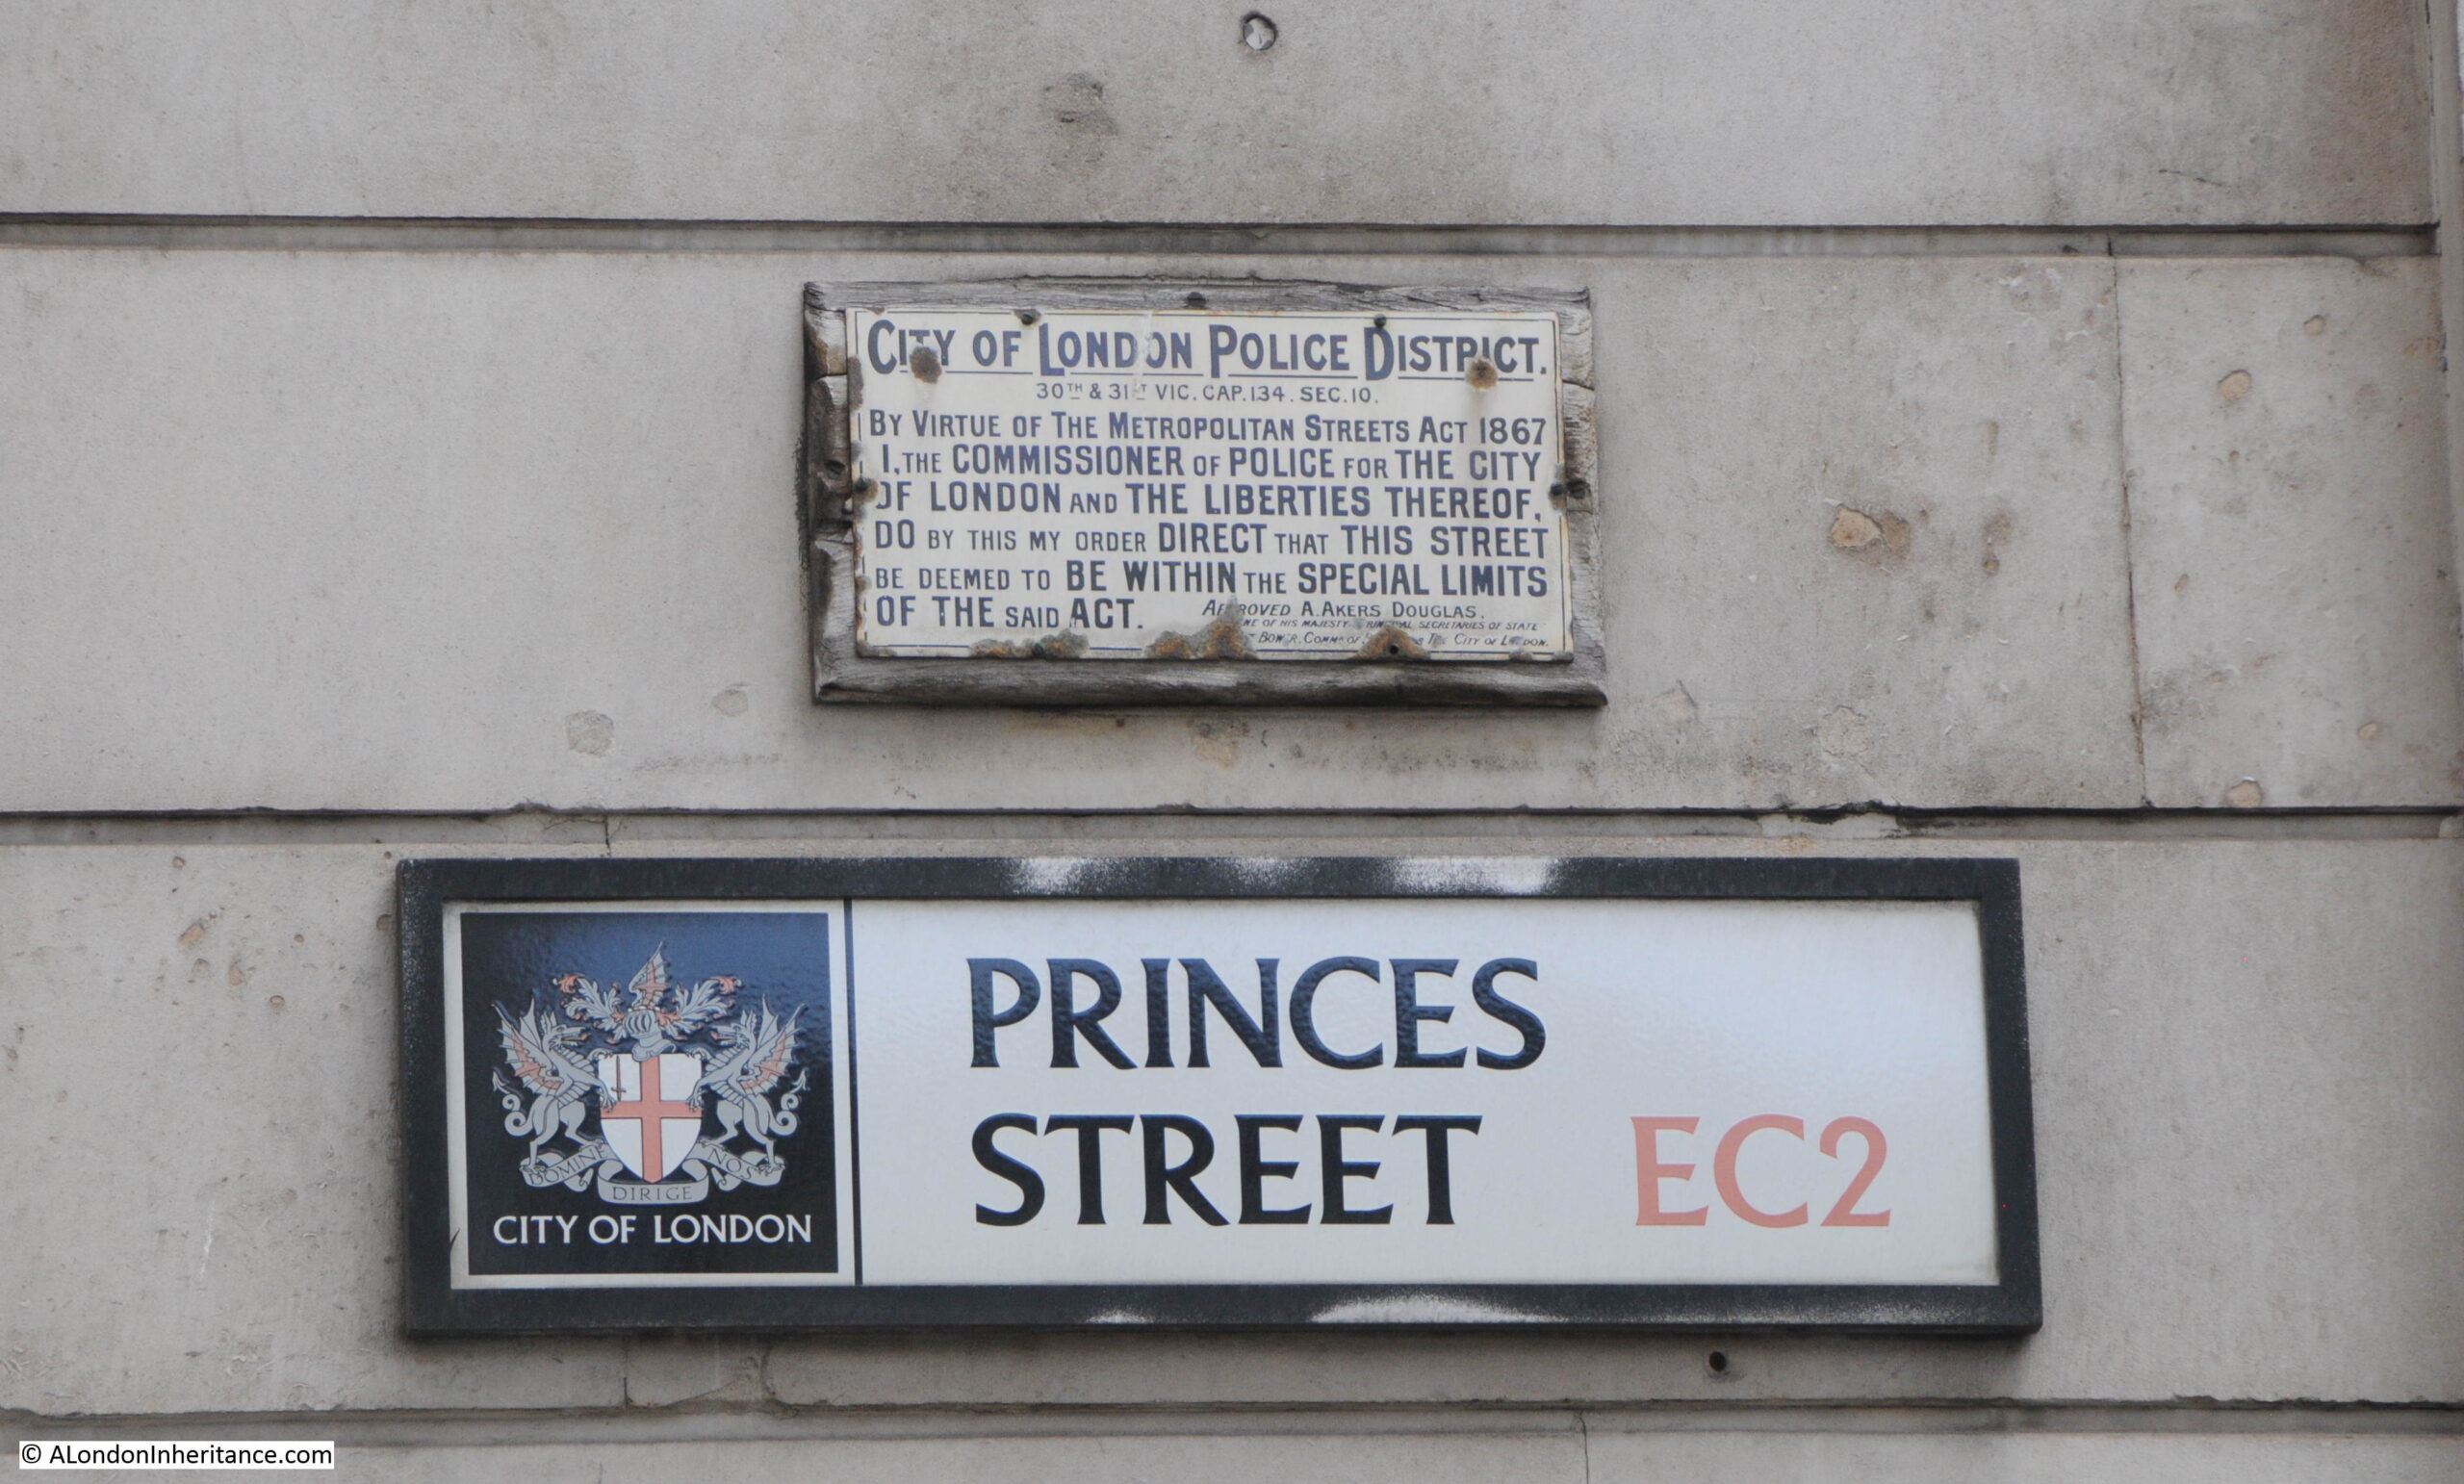 City of London Police District